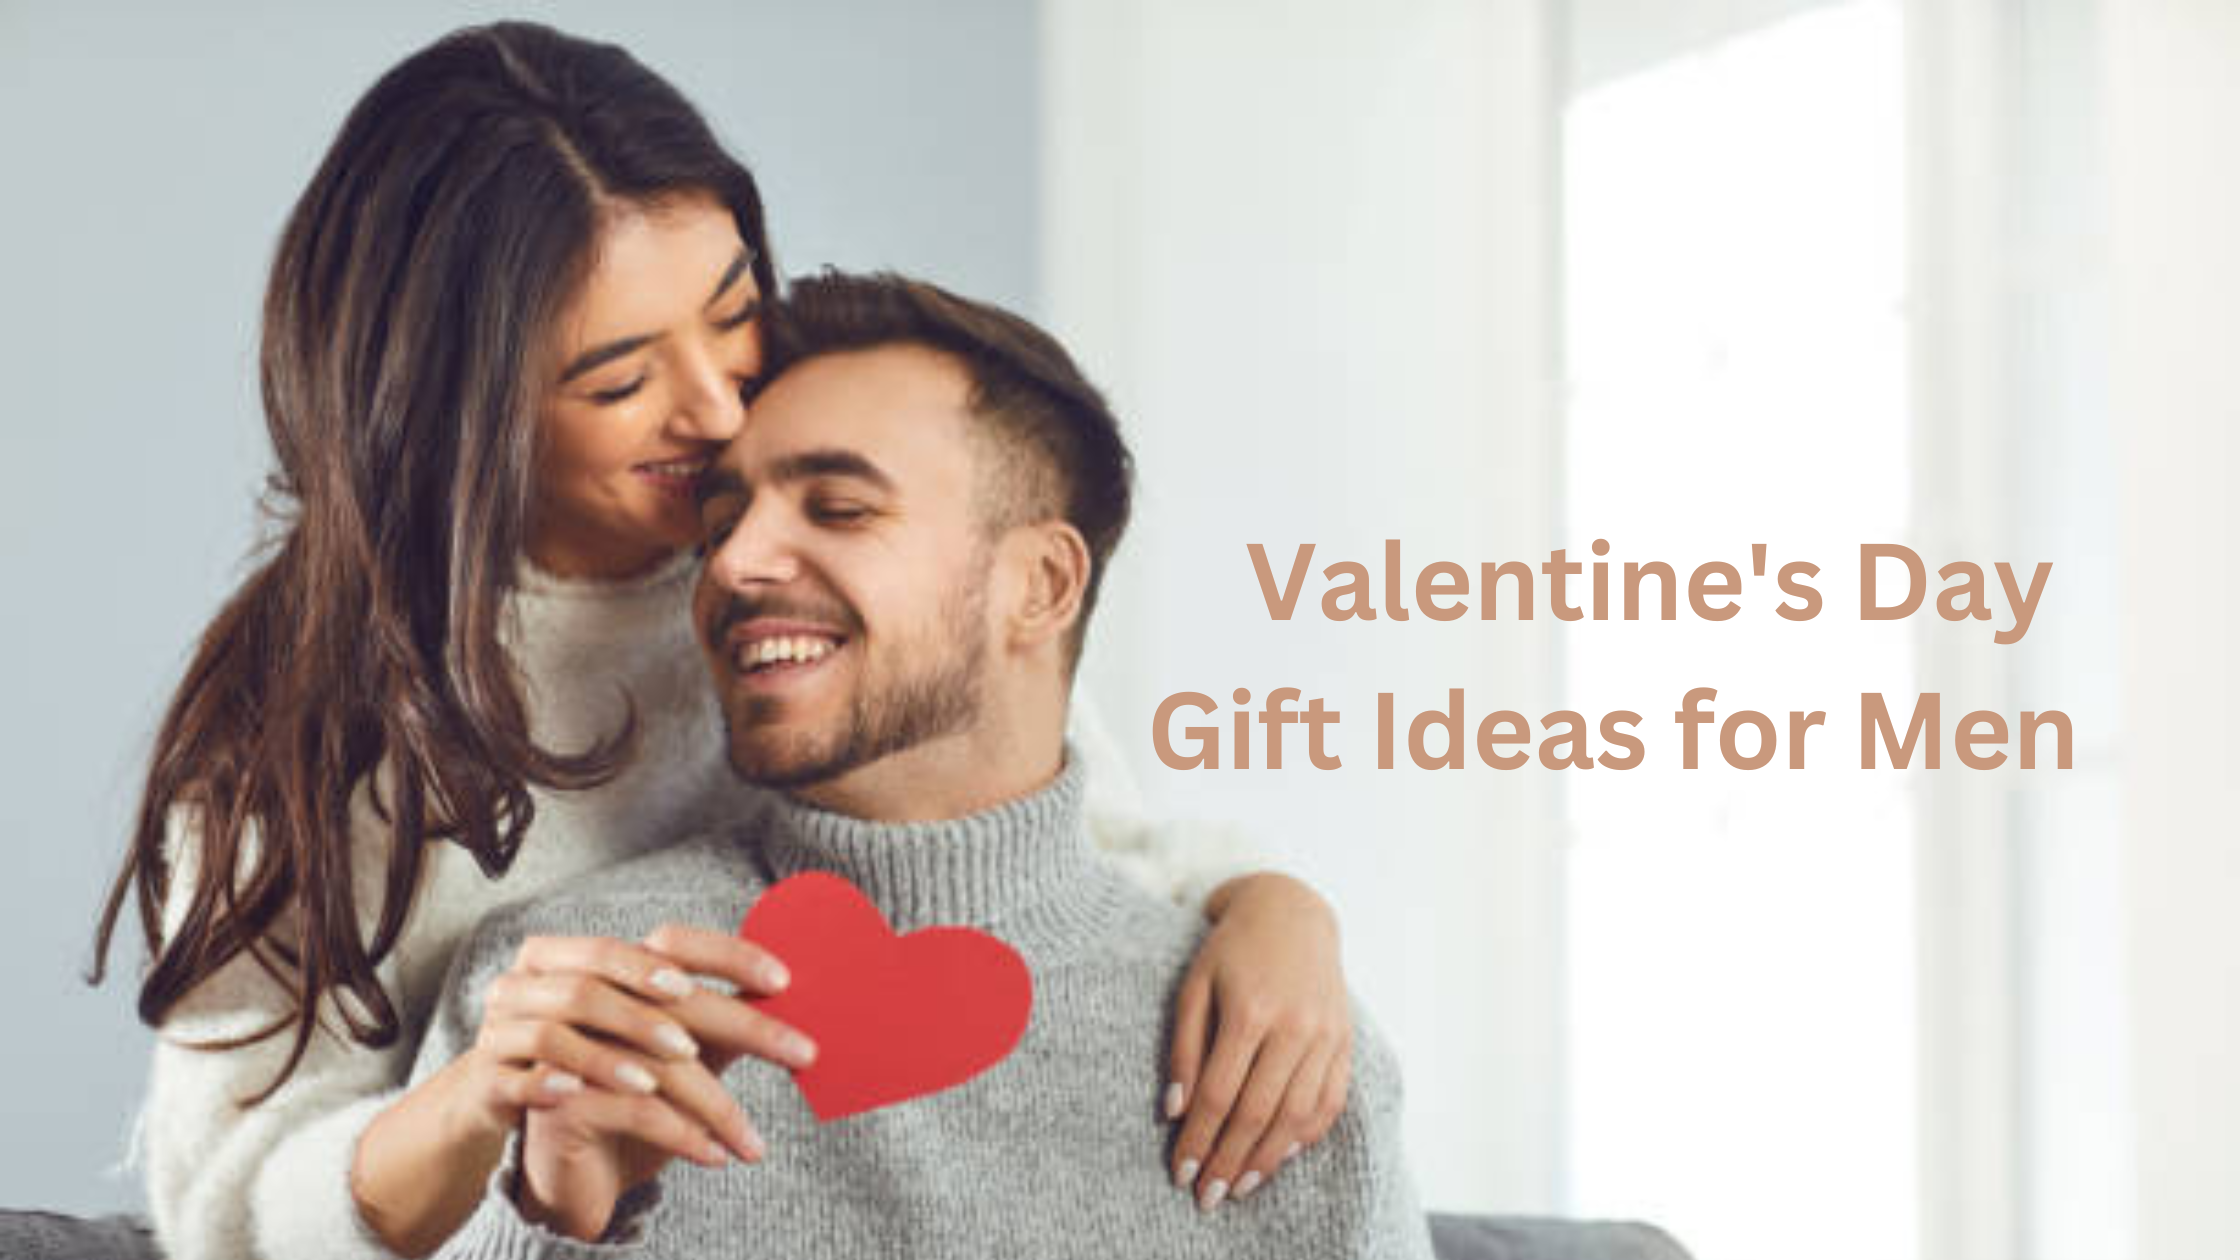 Amazon.com: Lacrima Naughty Gifts for Wife Husband Boyfriend - Valentines  Day Gifts for Him Husband Boyfriend, Valentines Day Gifts for Her Wife  Girlfriend, Valentine Gifts for Him Her, Lavender Candle : Home